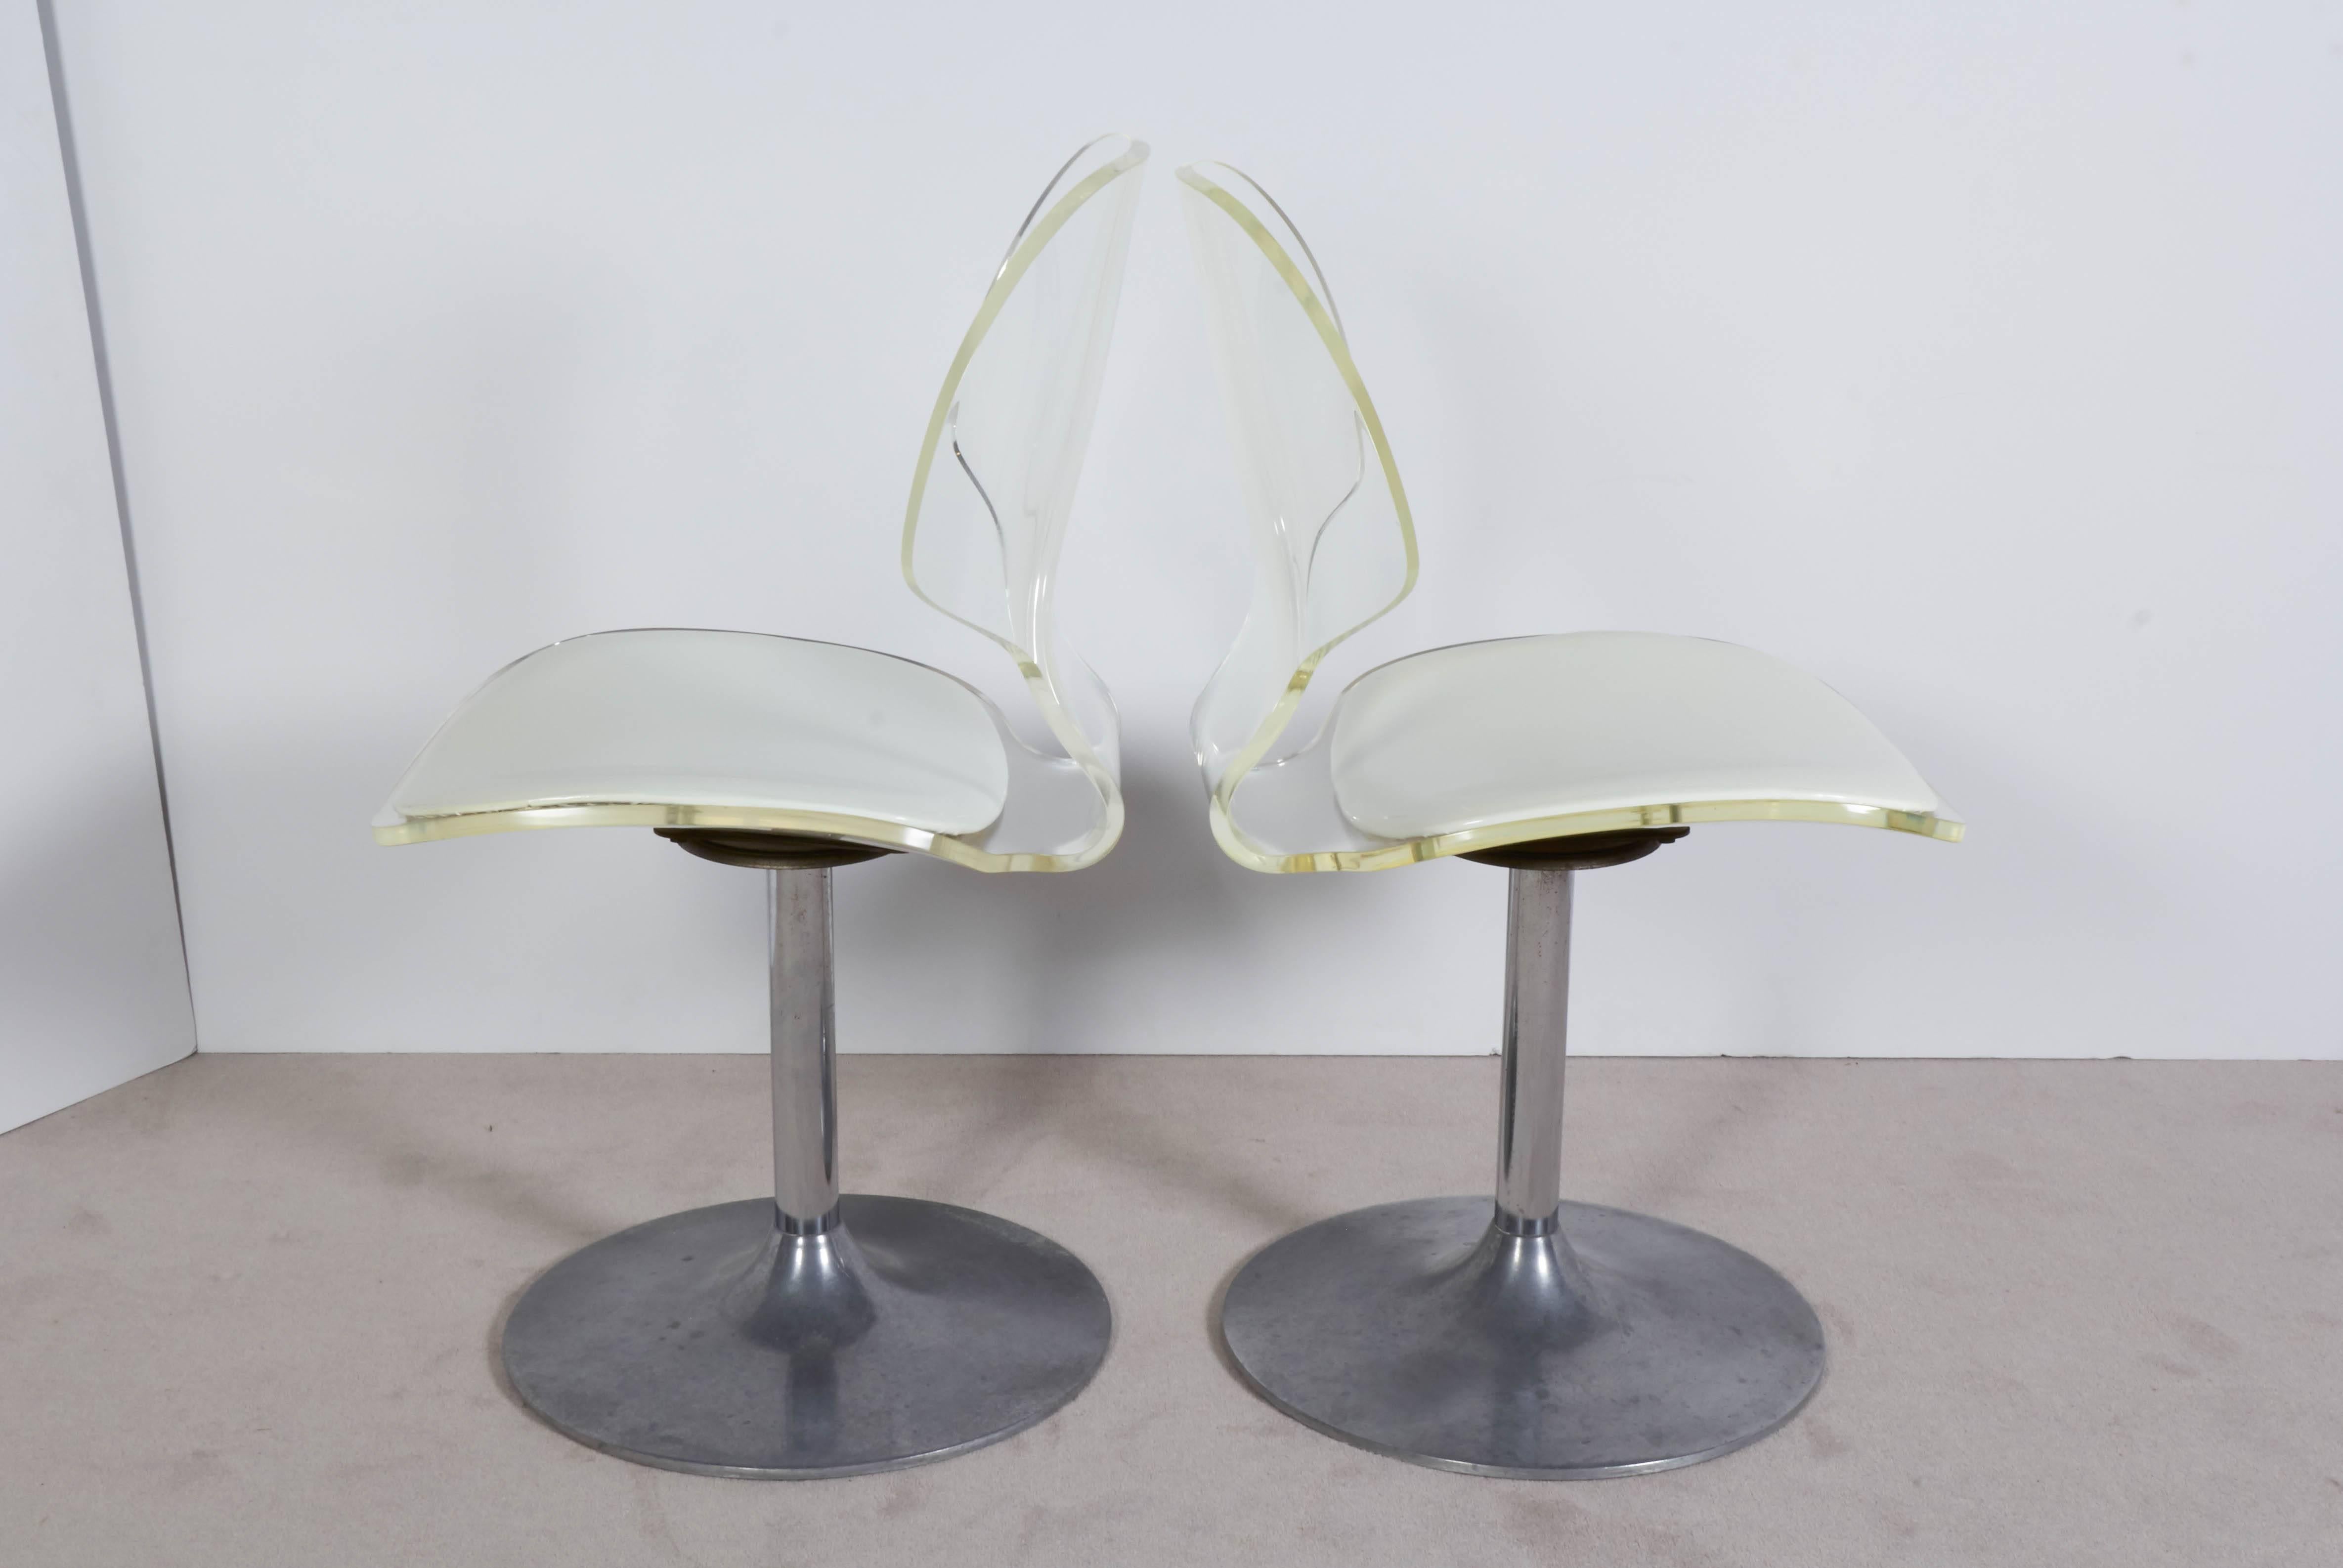 A side chair or stool by Hill Manufacturing Company, with ergonomically designed curved Lucite frames with white vinyl seat, raised on tulip form base in aluminium, circa 1970s. Manufacturer's label included. Very good vintage condition, any